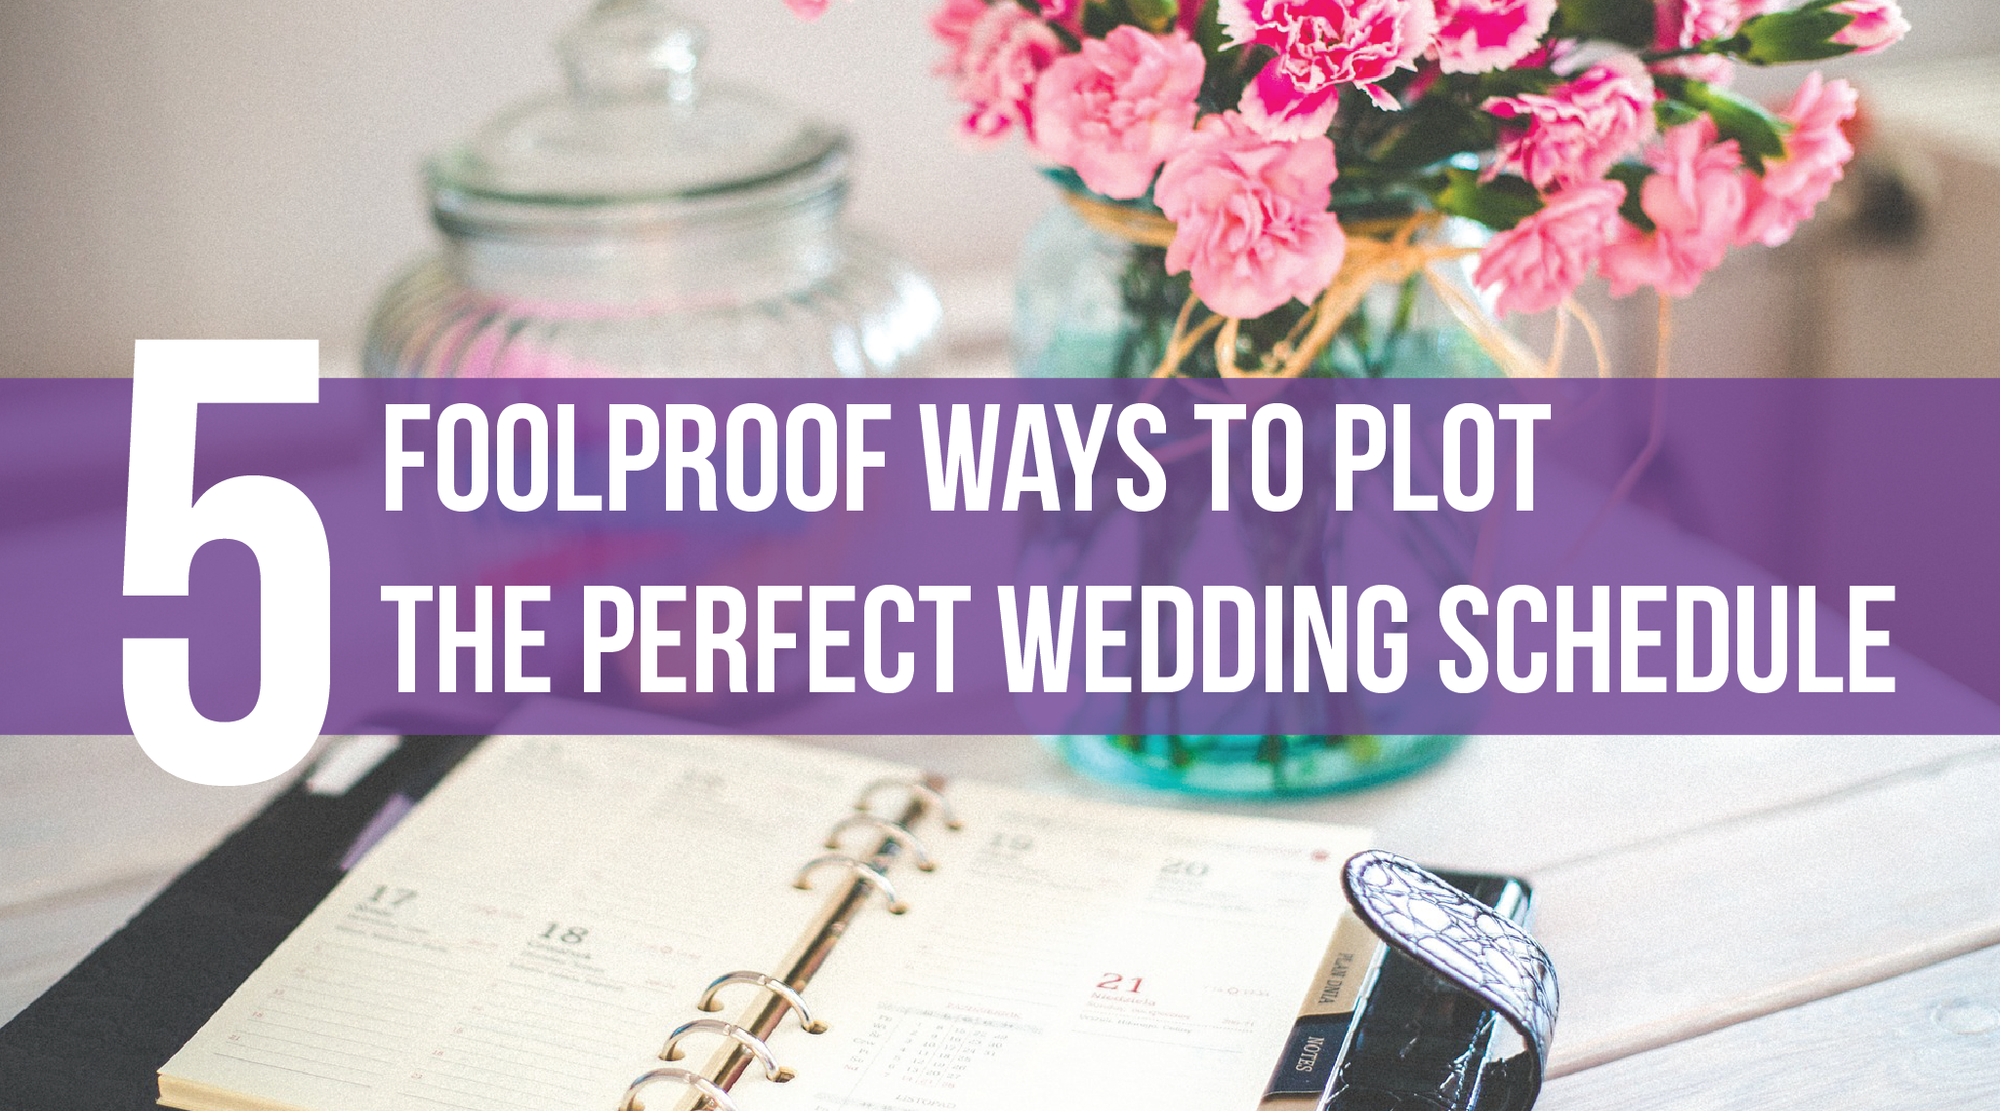 5 Foolproof Ways to Plot the Perfect Wedding Schedule